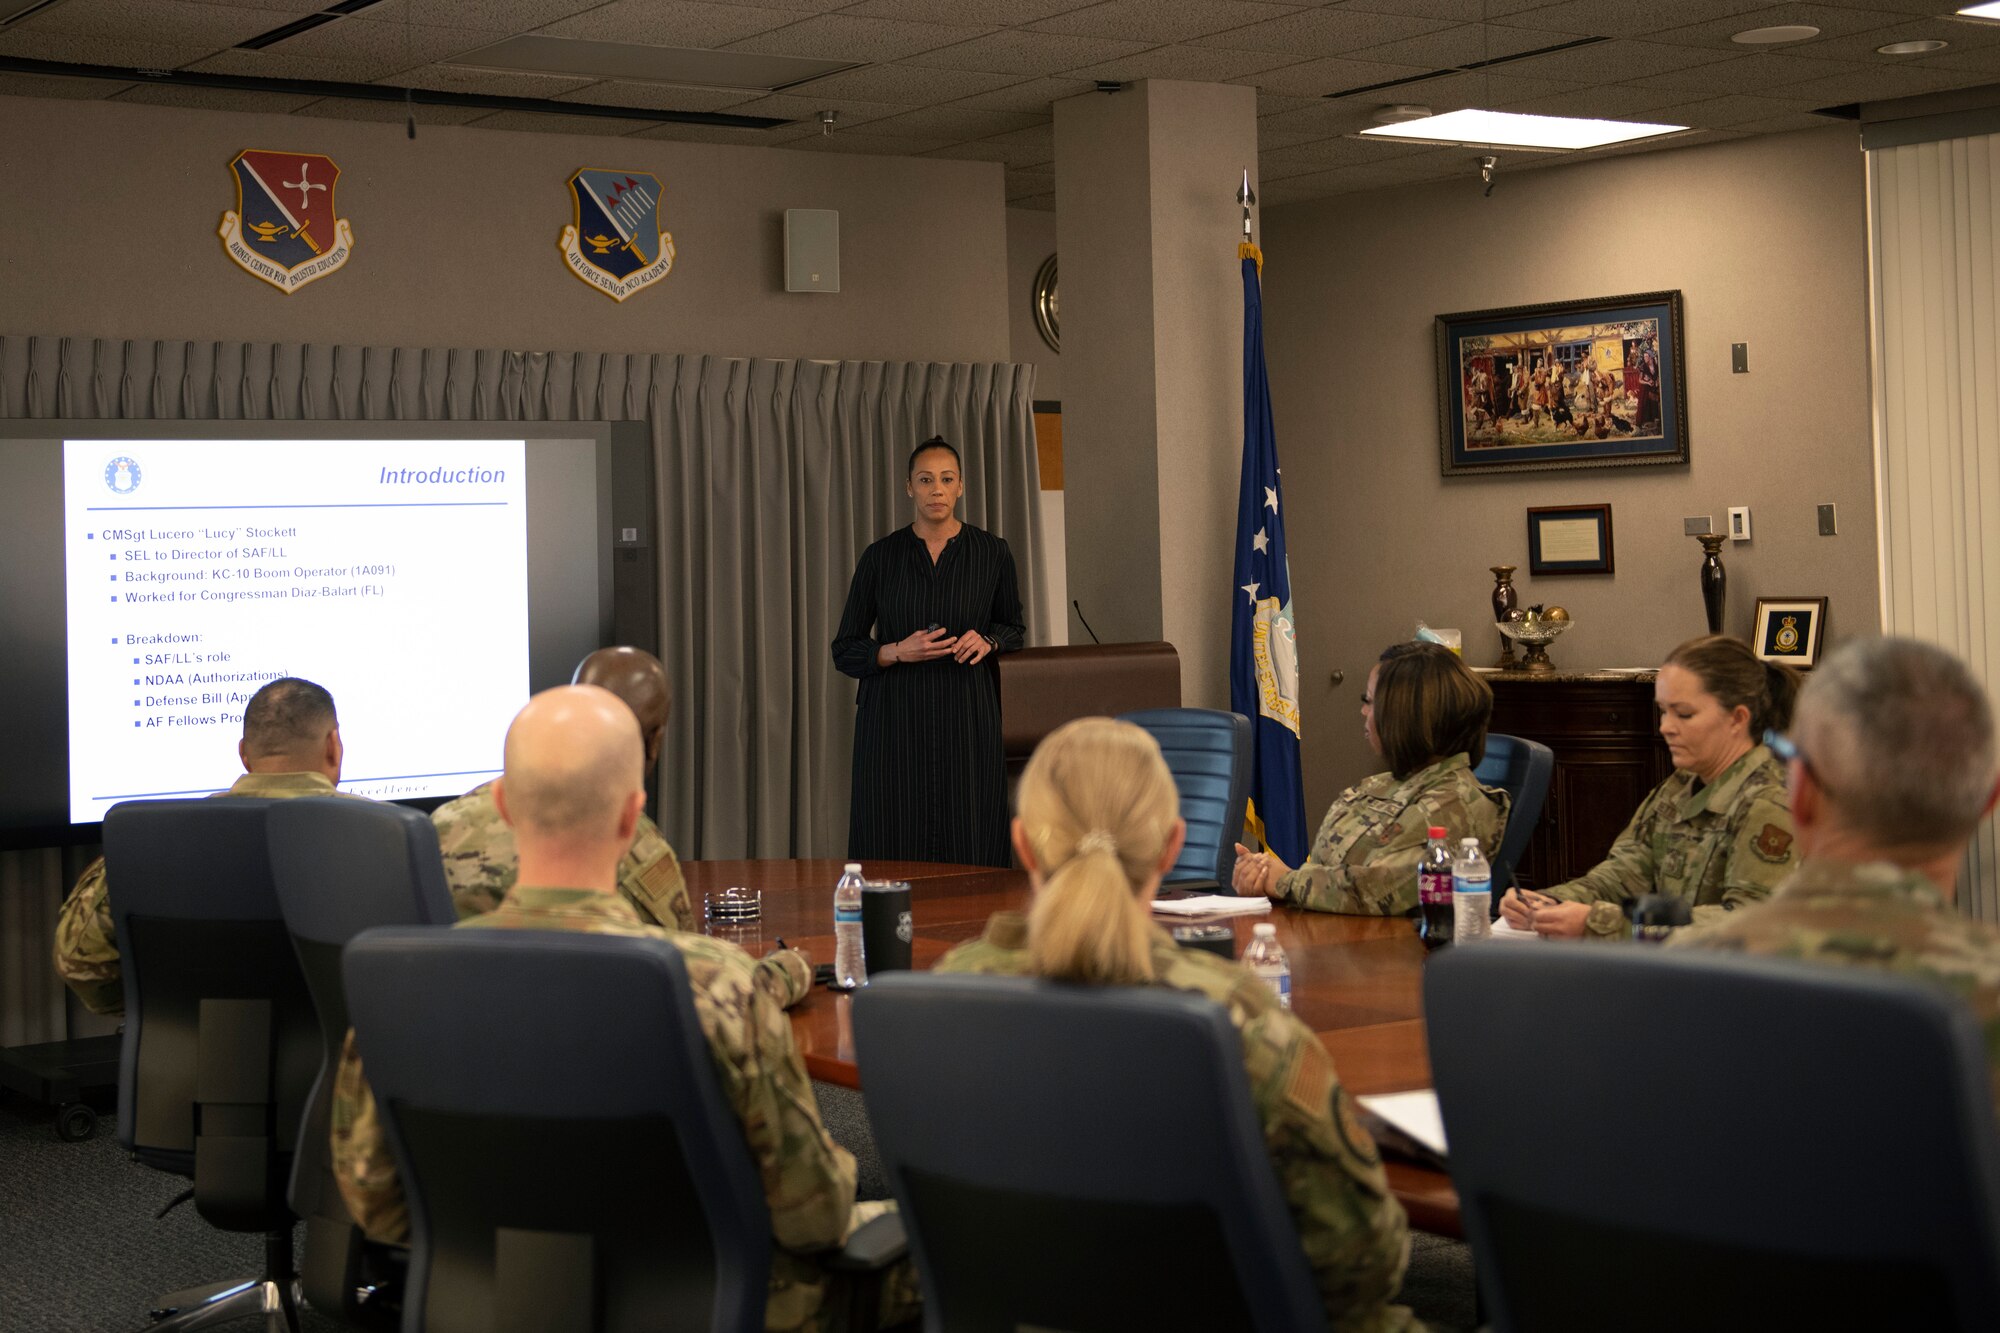 Chief Master Sgt. Lucero Stockett, senior enlisted leader to the Secretary of the Air Force legislative liaison, briefs chiefs during the Strategic Leader Course Mar. 28, 2022. The Chief Leadership Academy has been working to create a professional development course that will increase the strategic readiness, professional agility and enterprise level leadership of senior leaders.